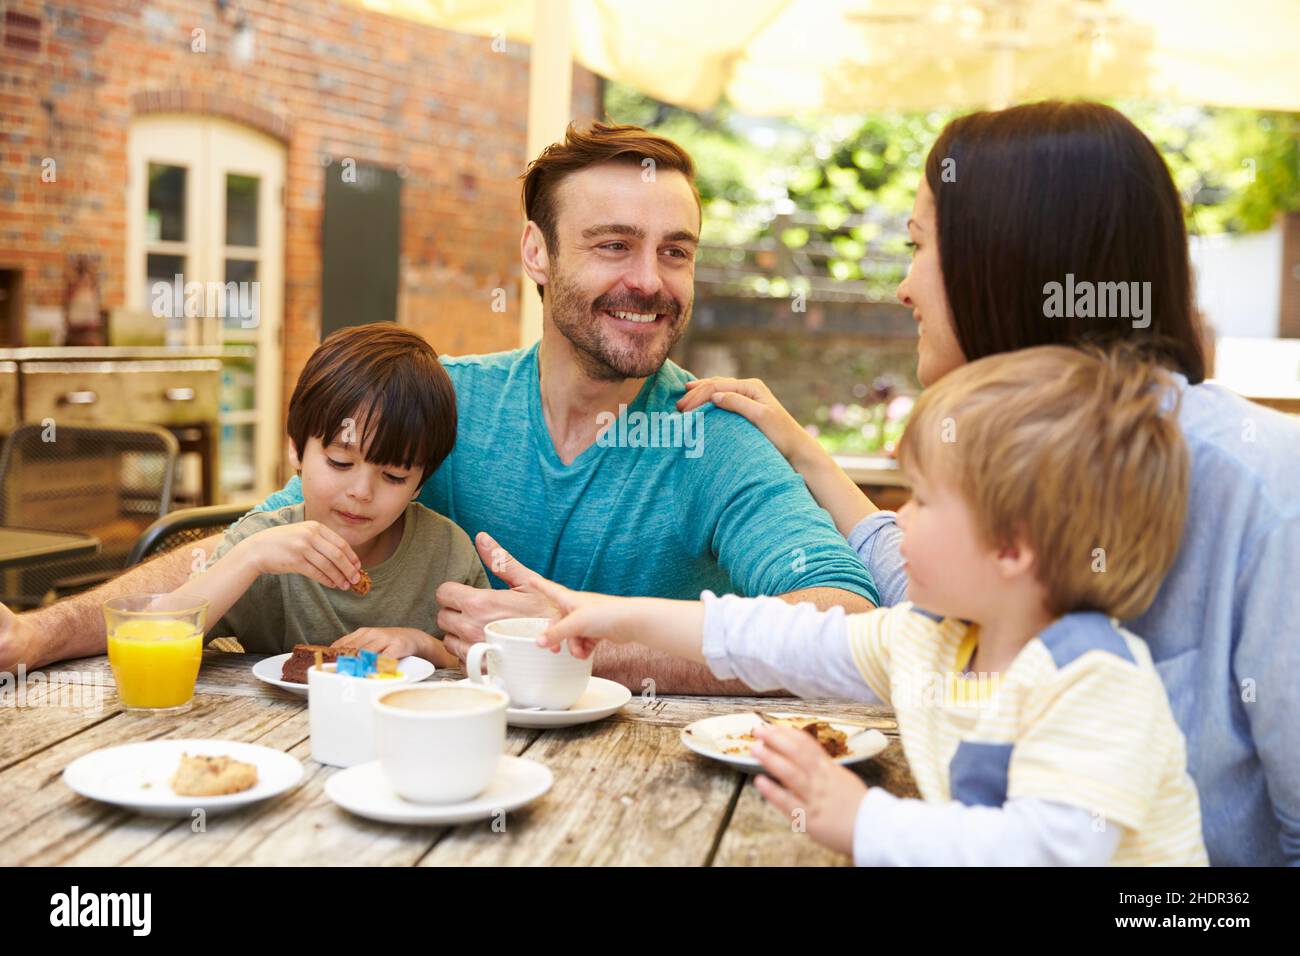 cafe, coffee time, family, cafes, coffee break, families Stock Photo